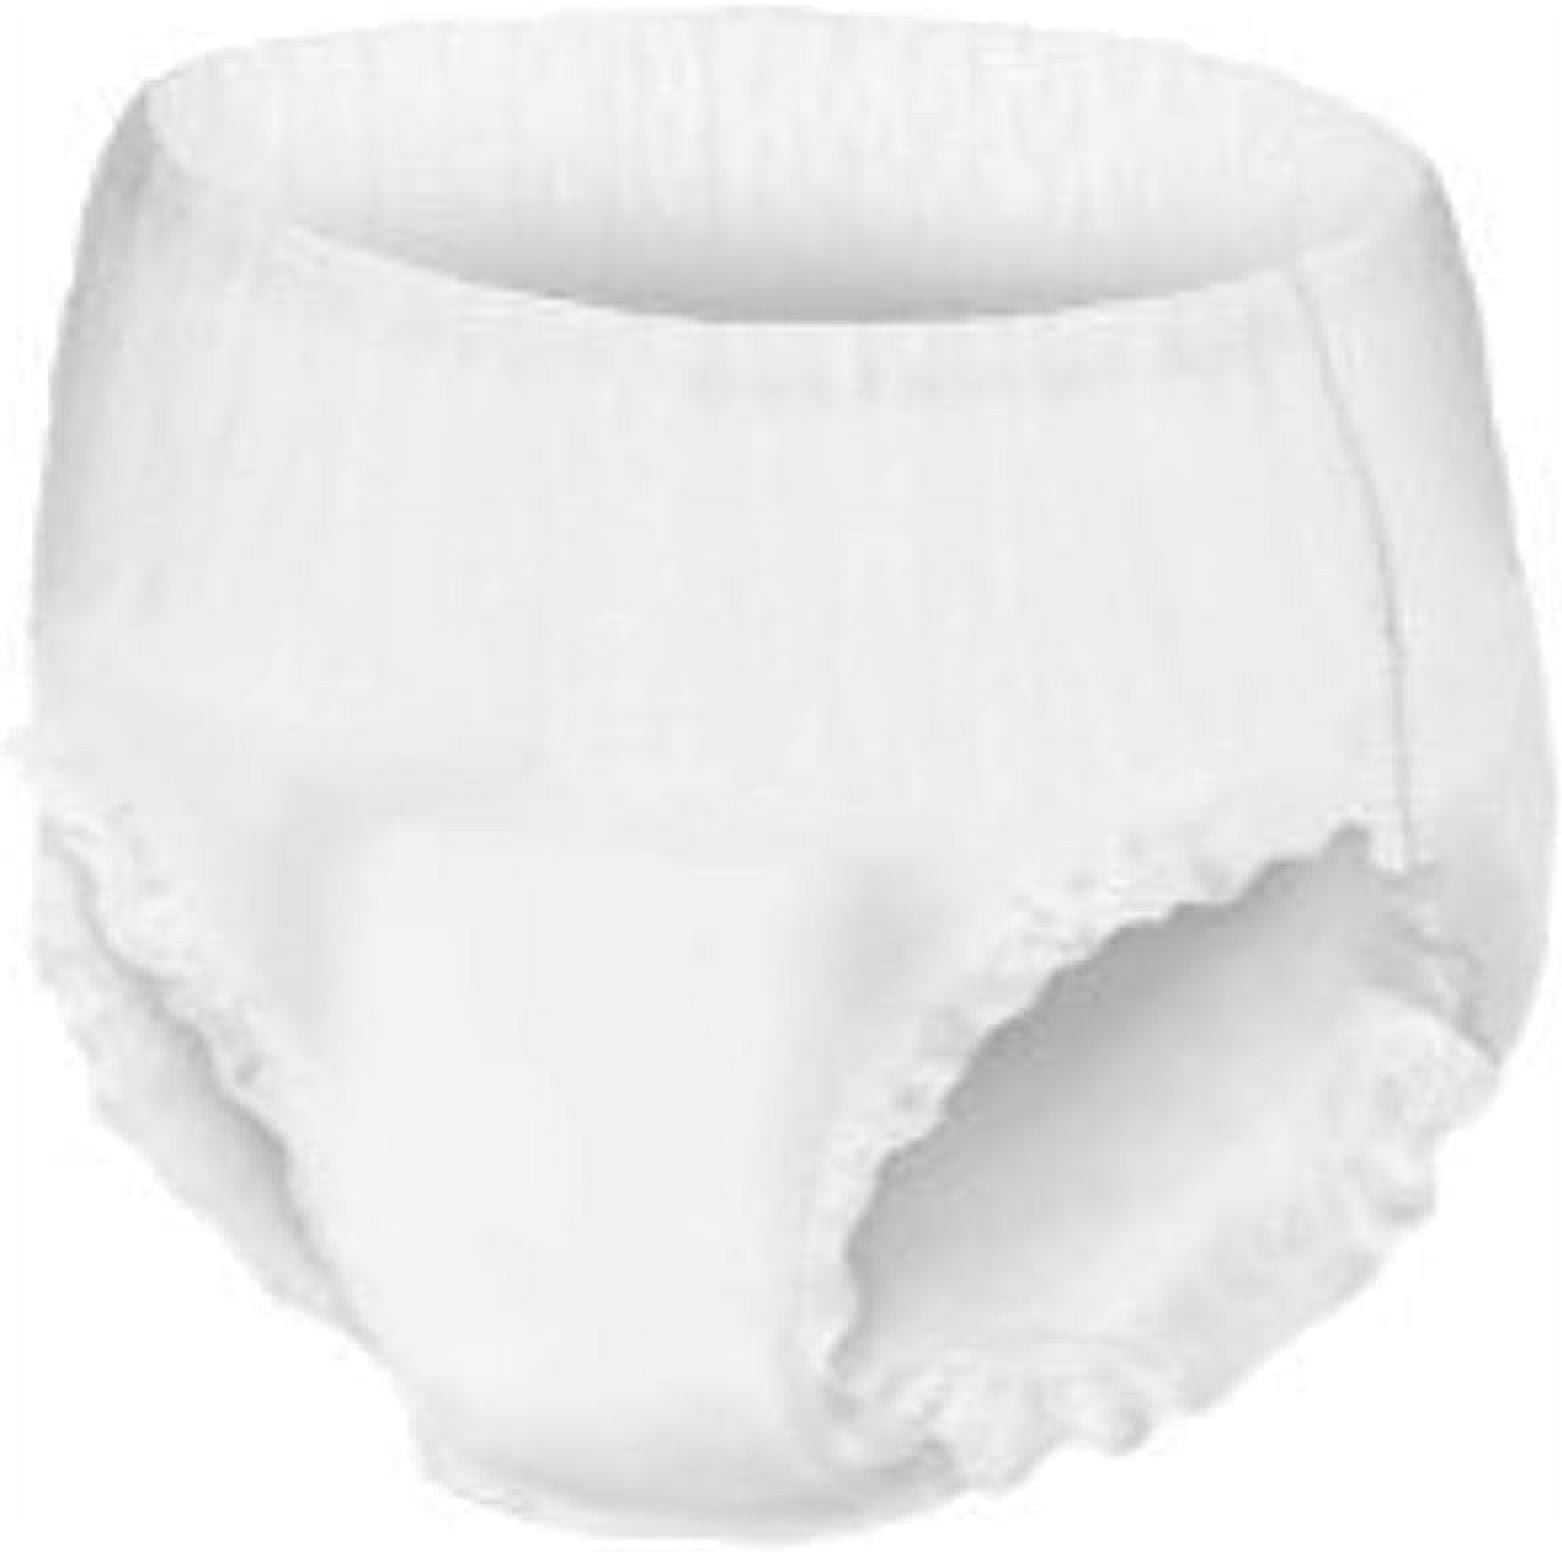 Prevail Per-Fit Daily Underwear, Incontinence, Disposable, Extra